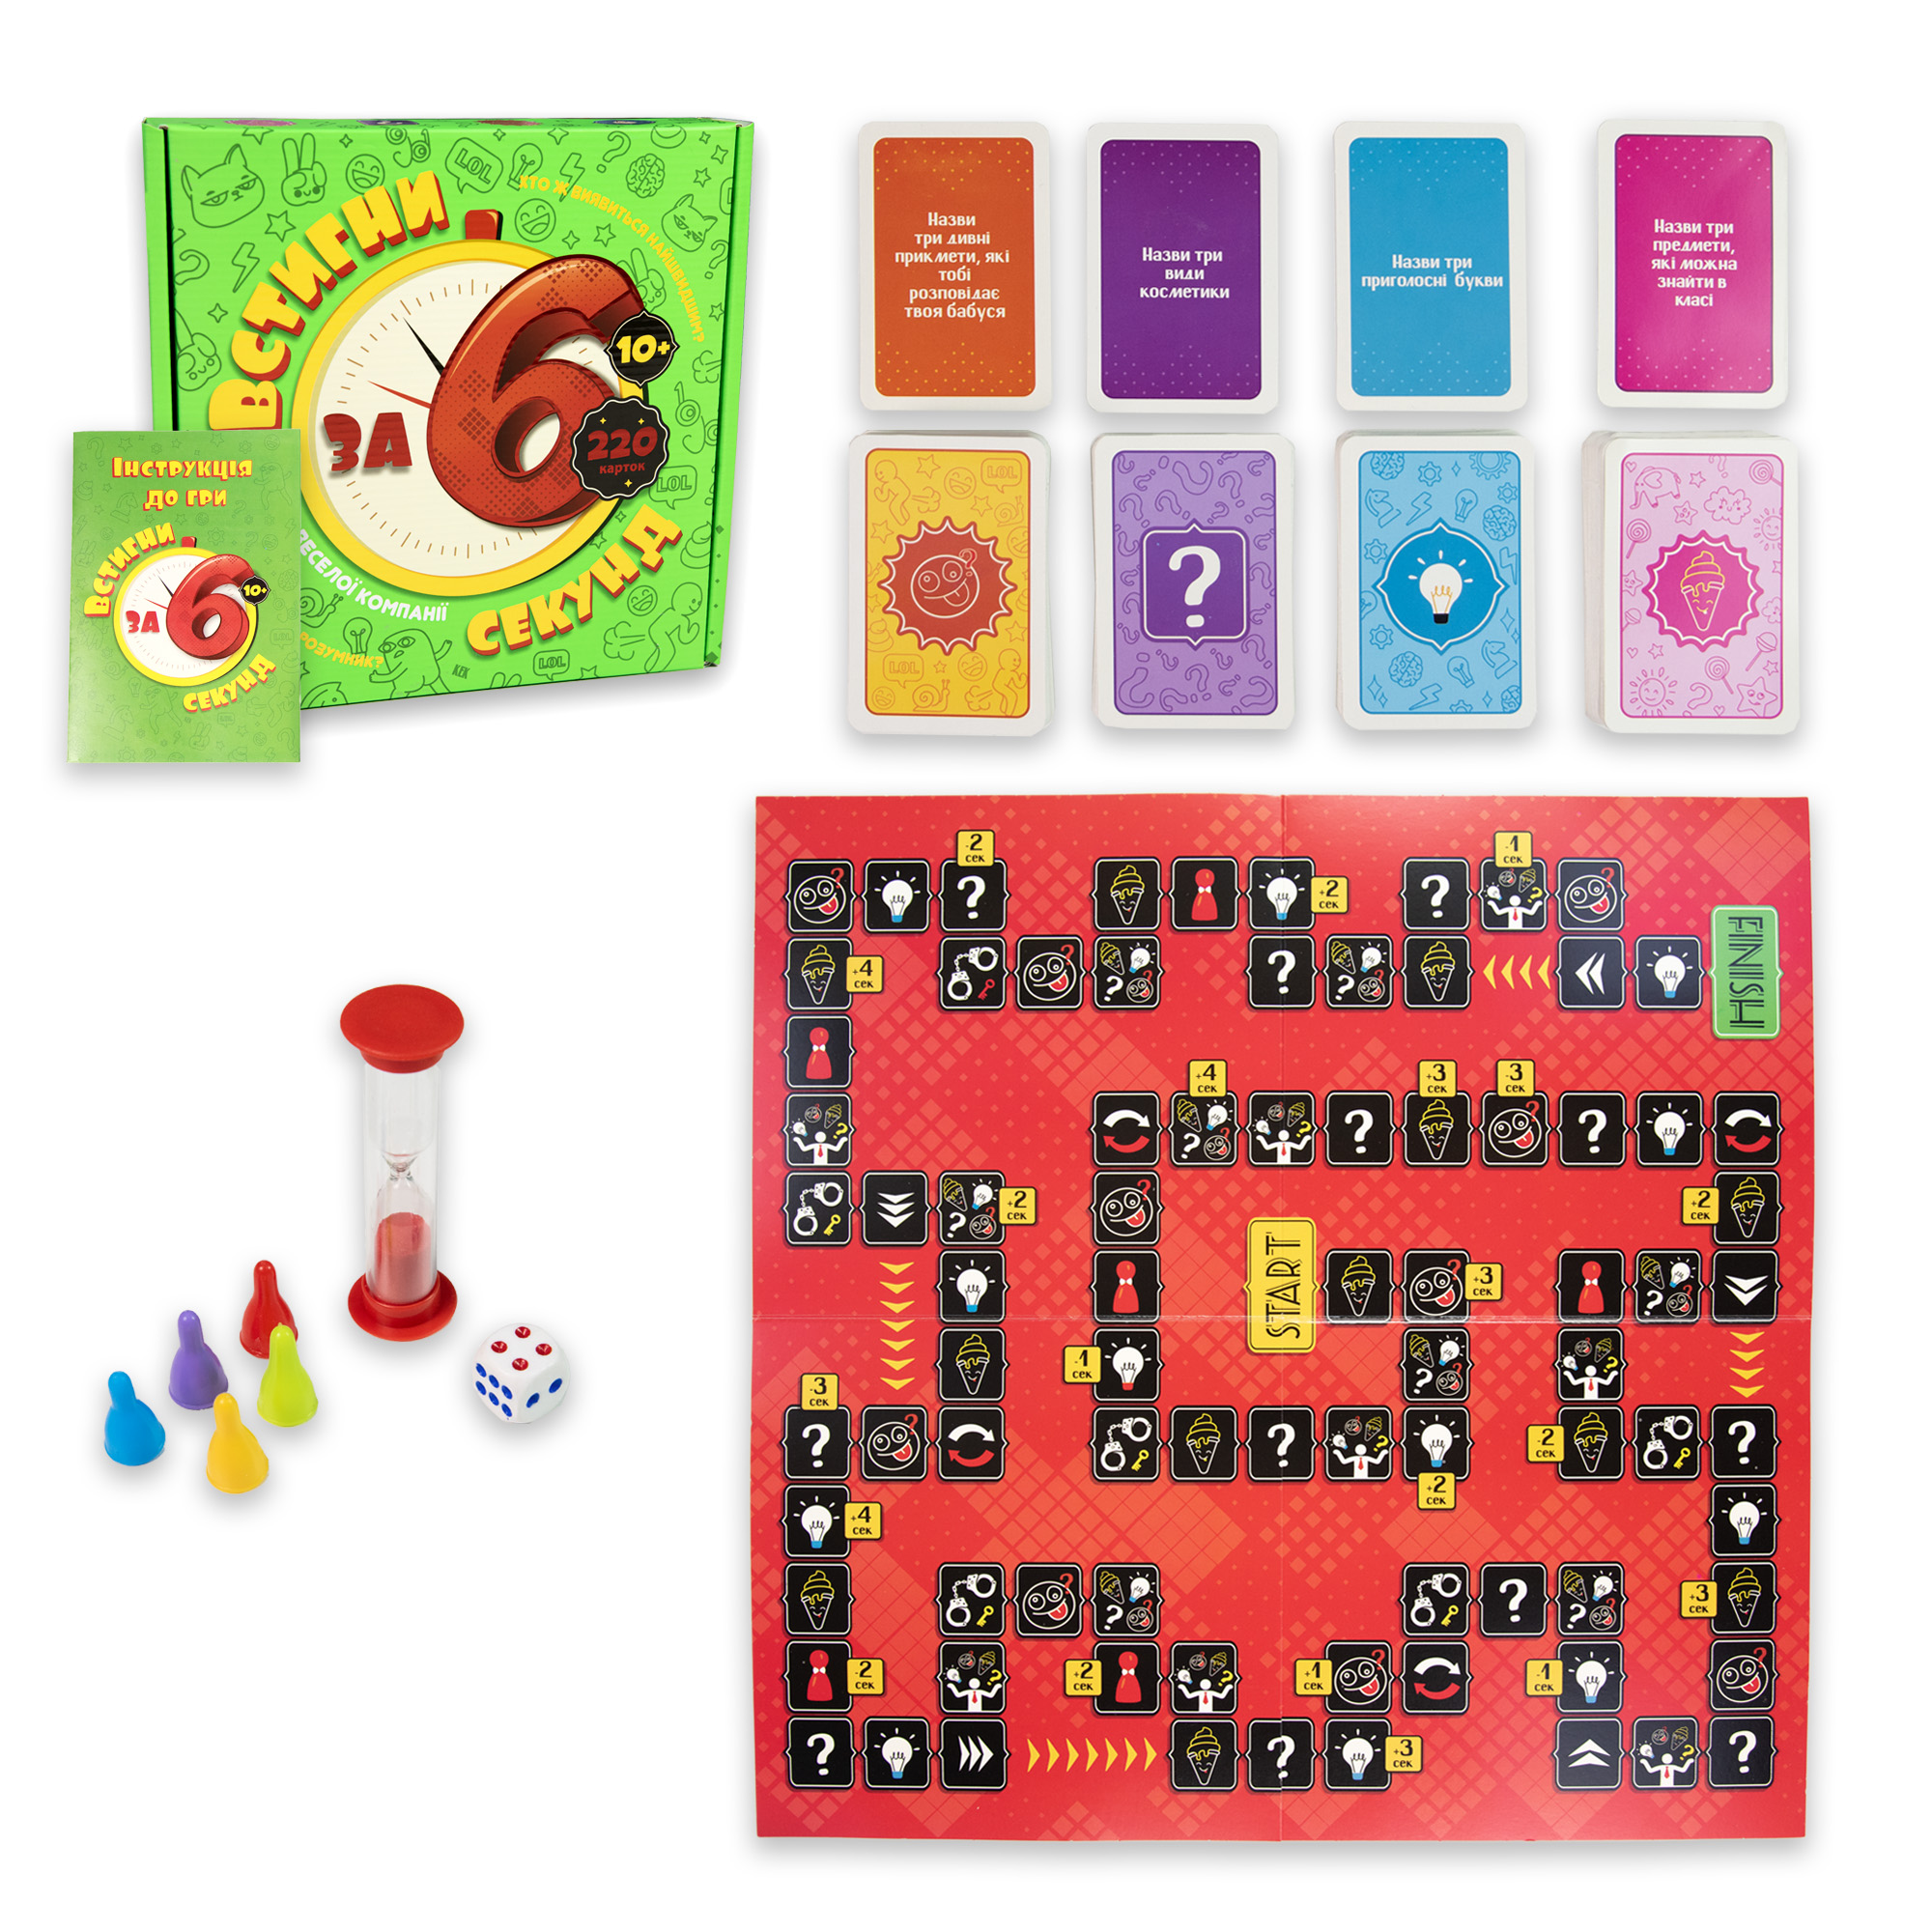 Board game Get it done in 6 seconds 10+ 30782